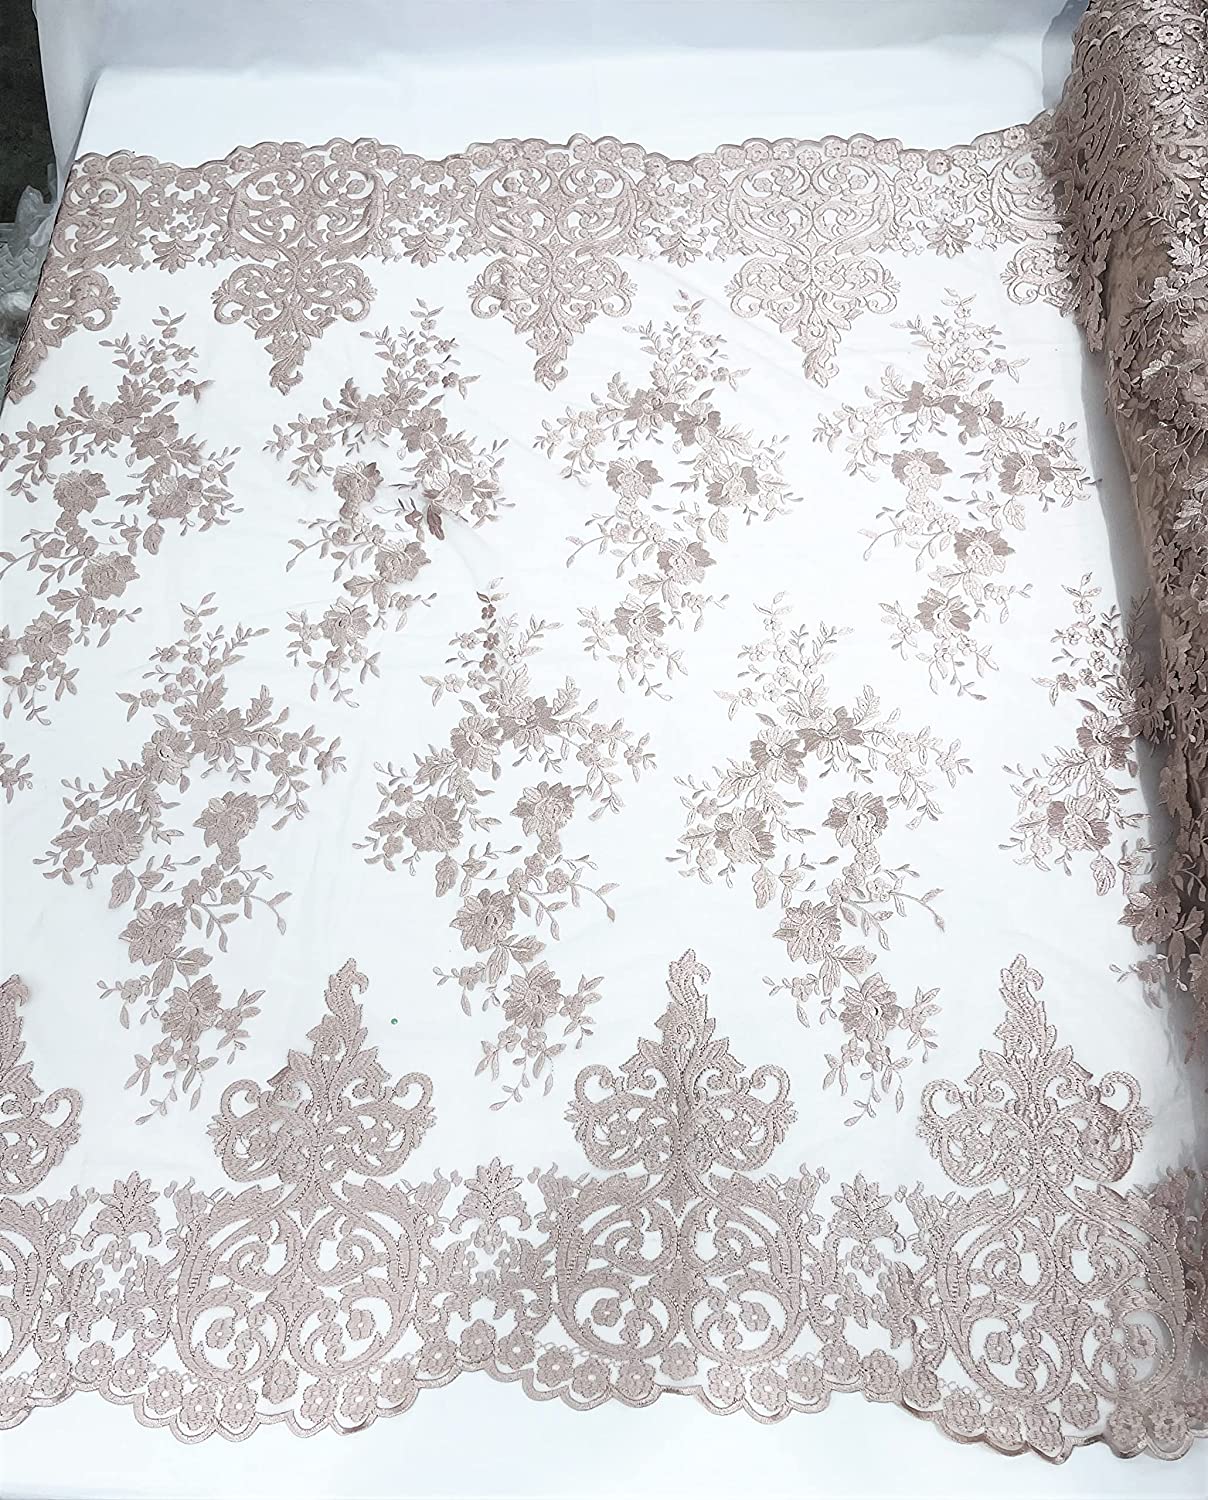 54" Wide Elegant Flower Damask Flat Lace Embroidery On A Mesh (1 Yard, Champagne)